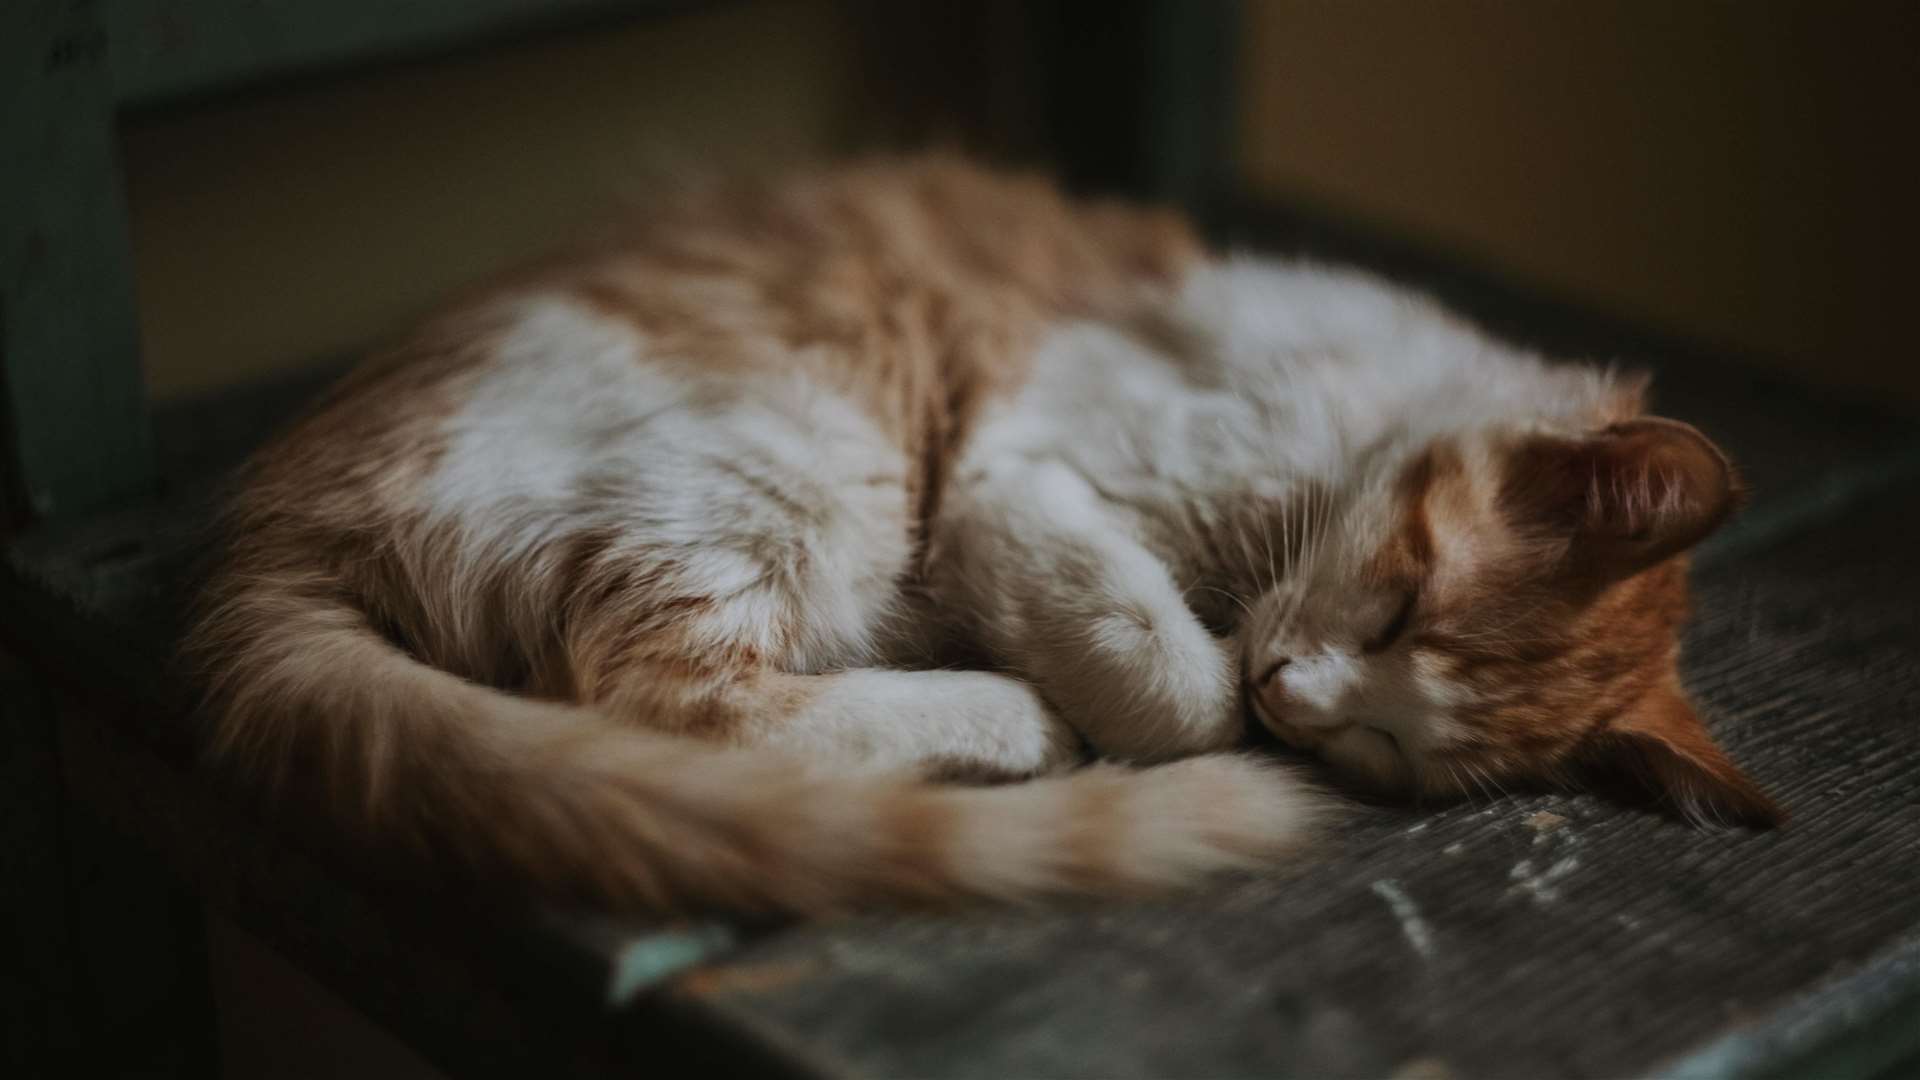 Belly up is the most vulnerable sleeping position. Picture: Matheus Bartell, Pexels